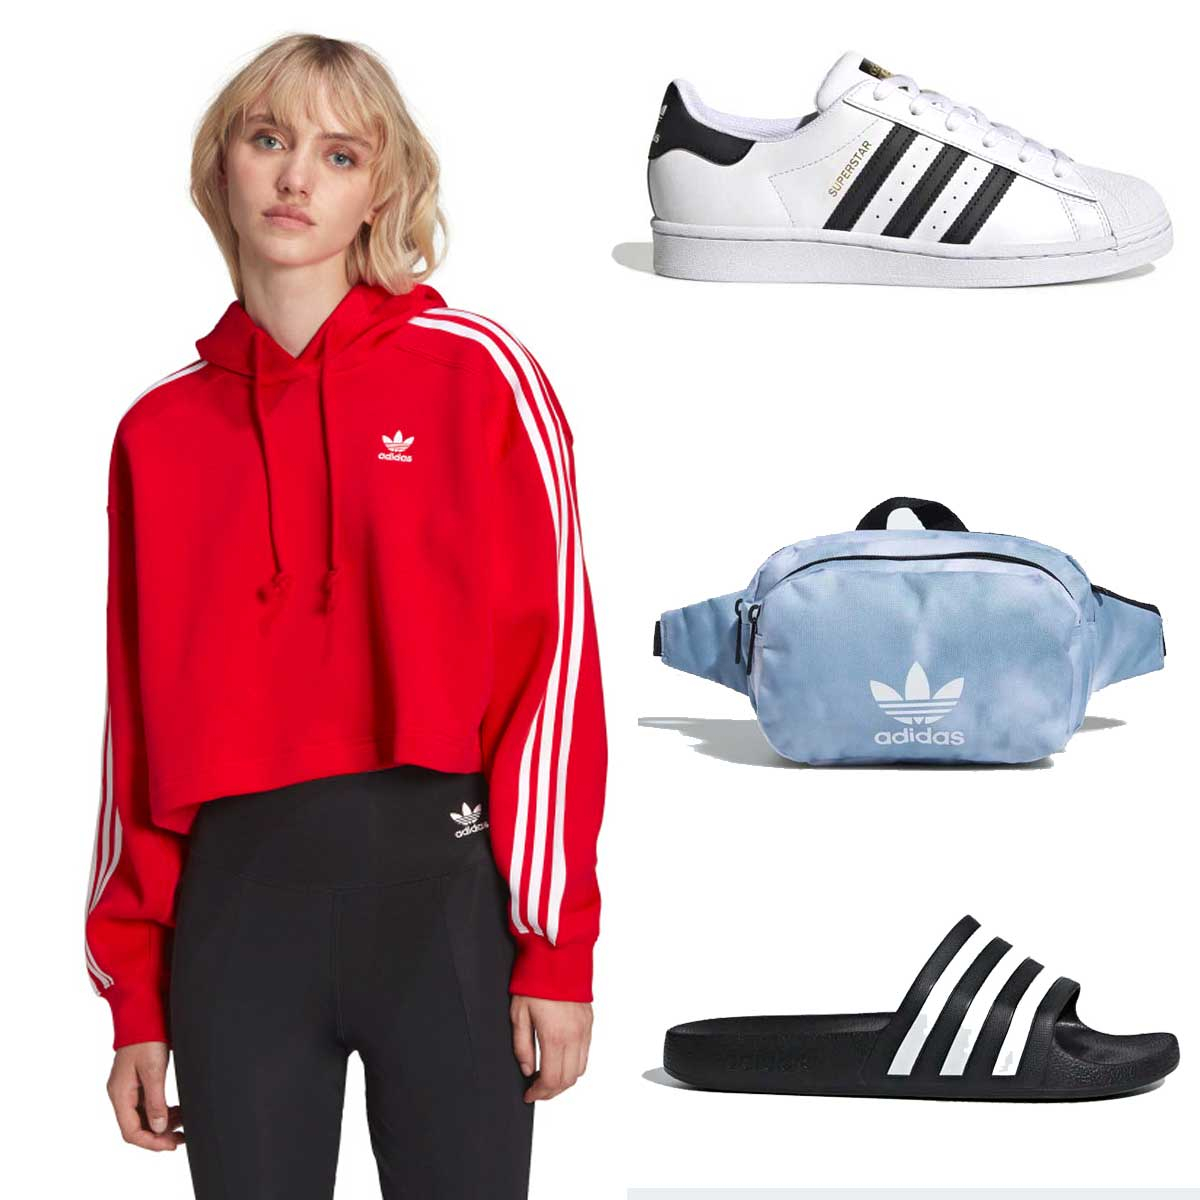 Adidas outfit @KortenStEiN  Adidas outfit women, Sporty outfits, Adidas  outfit